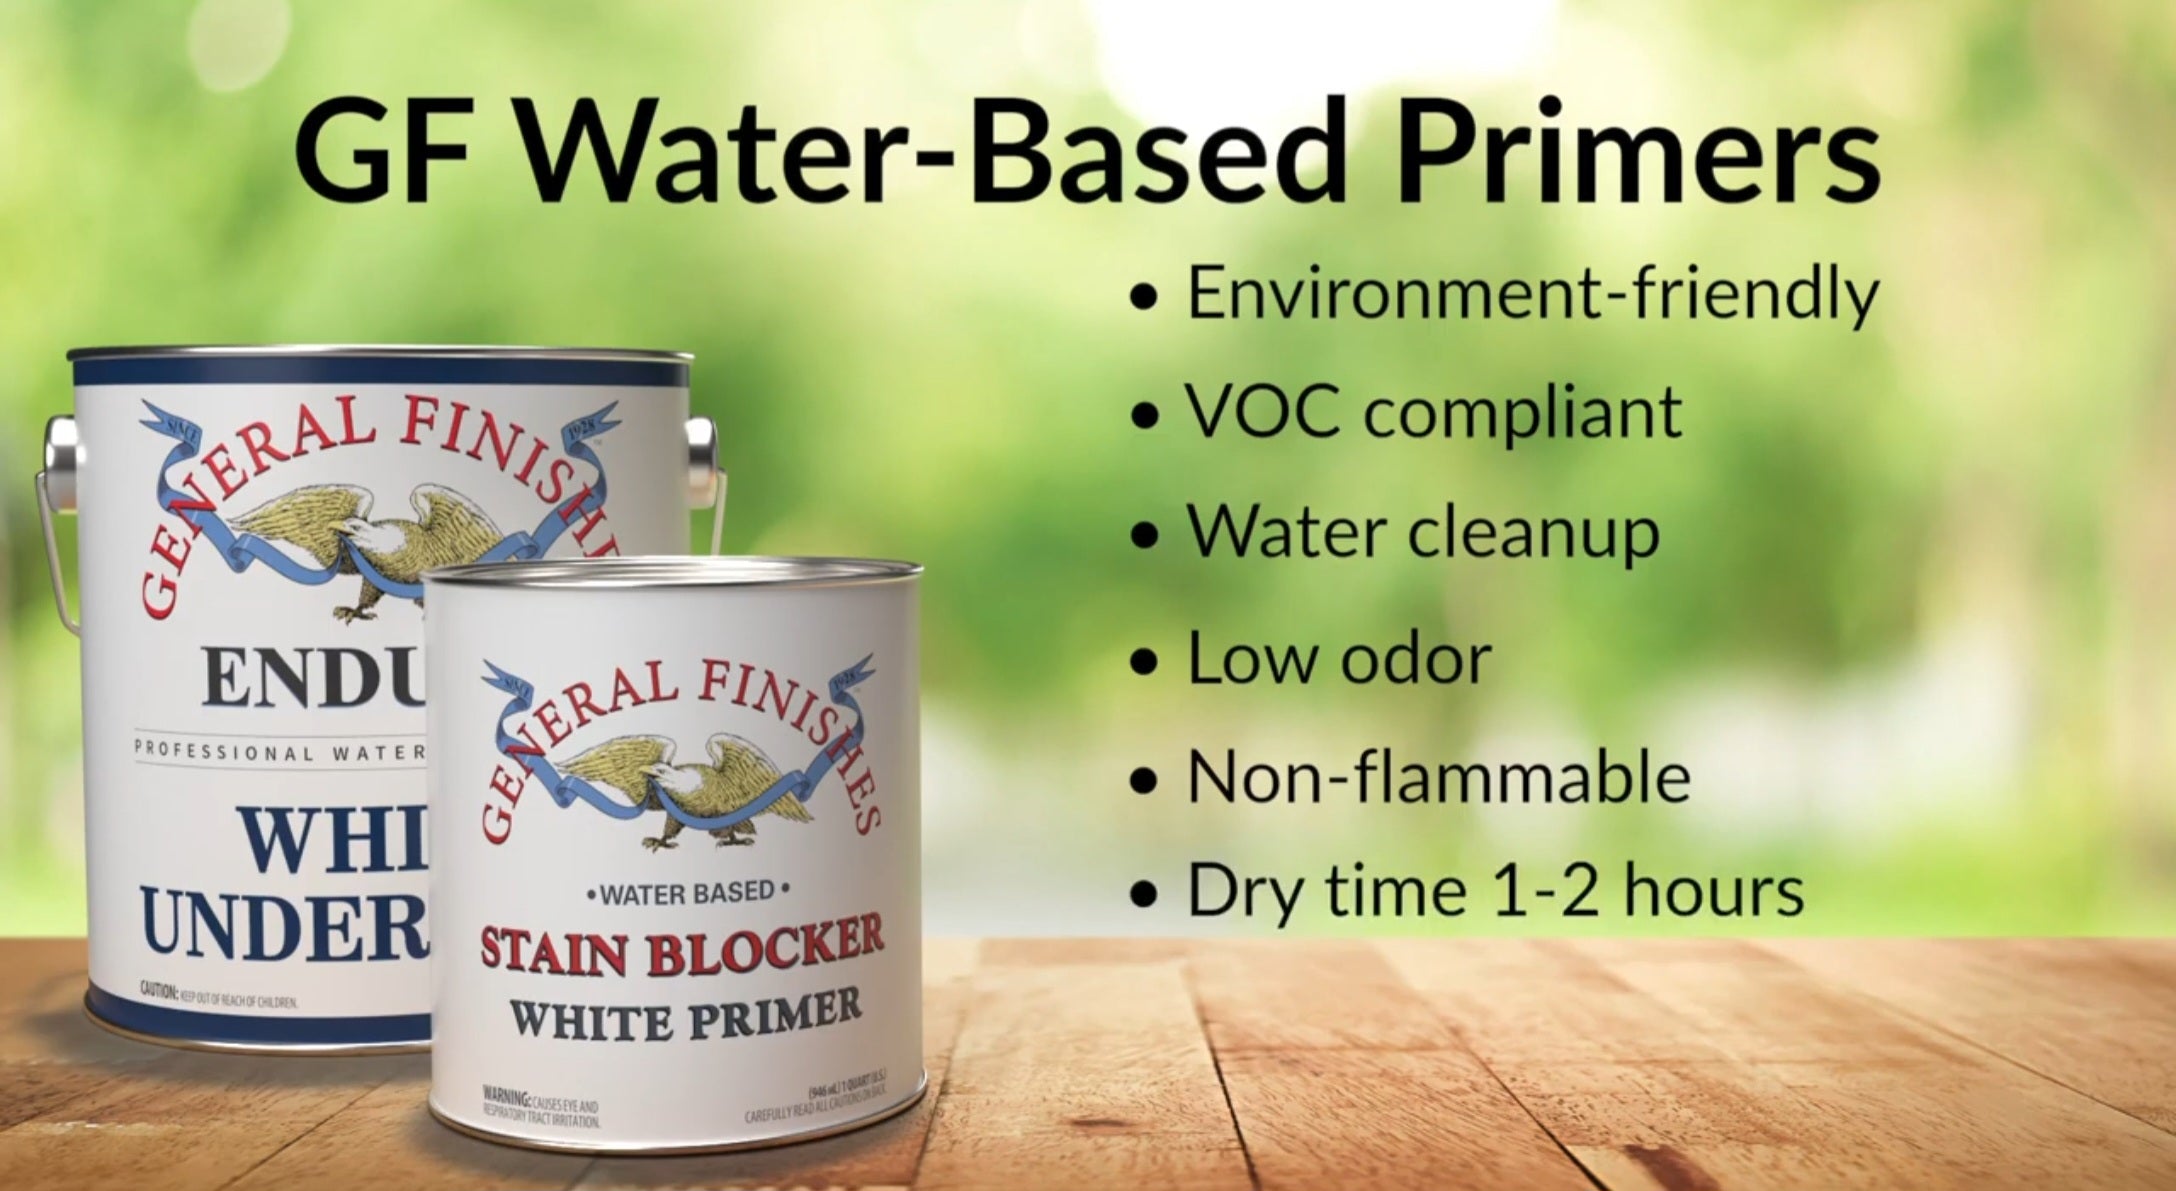 General Finishes Waterbased Primers